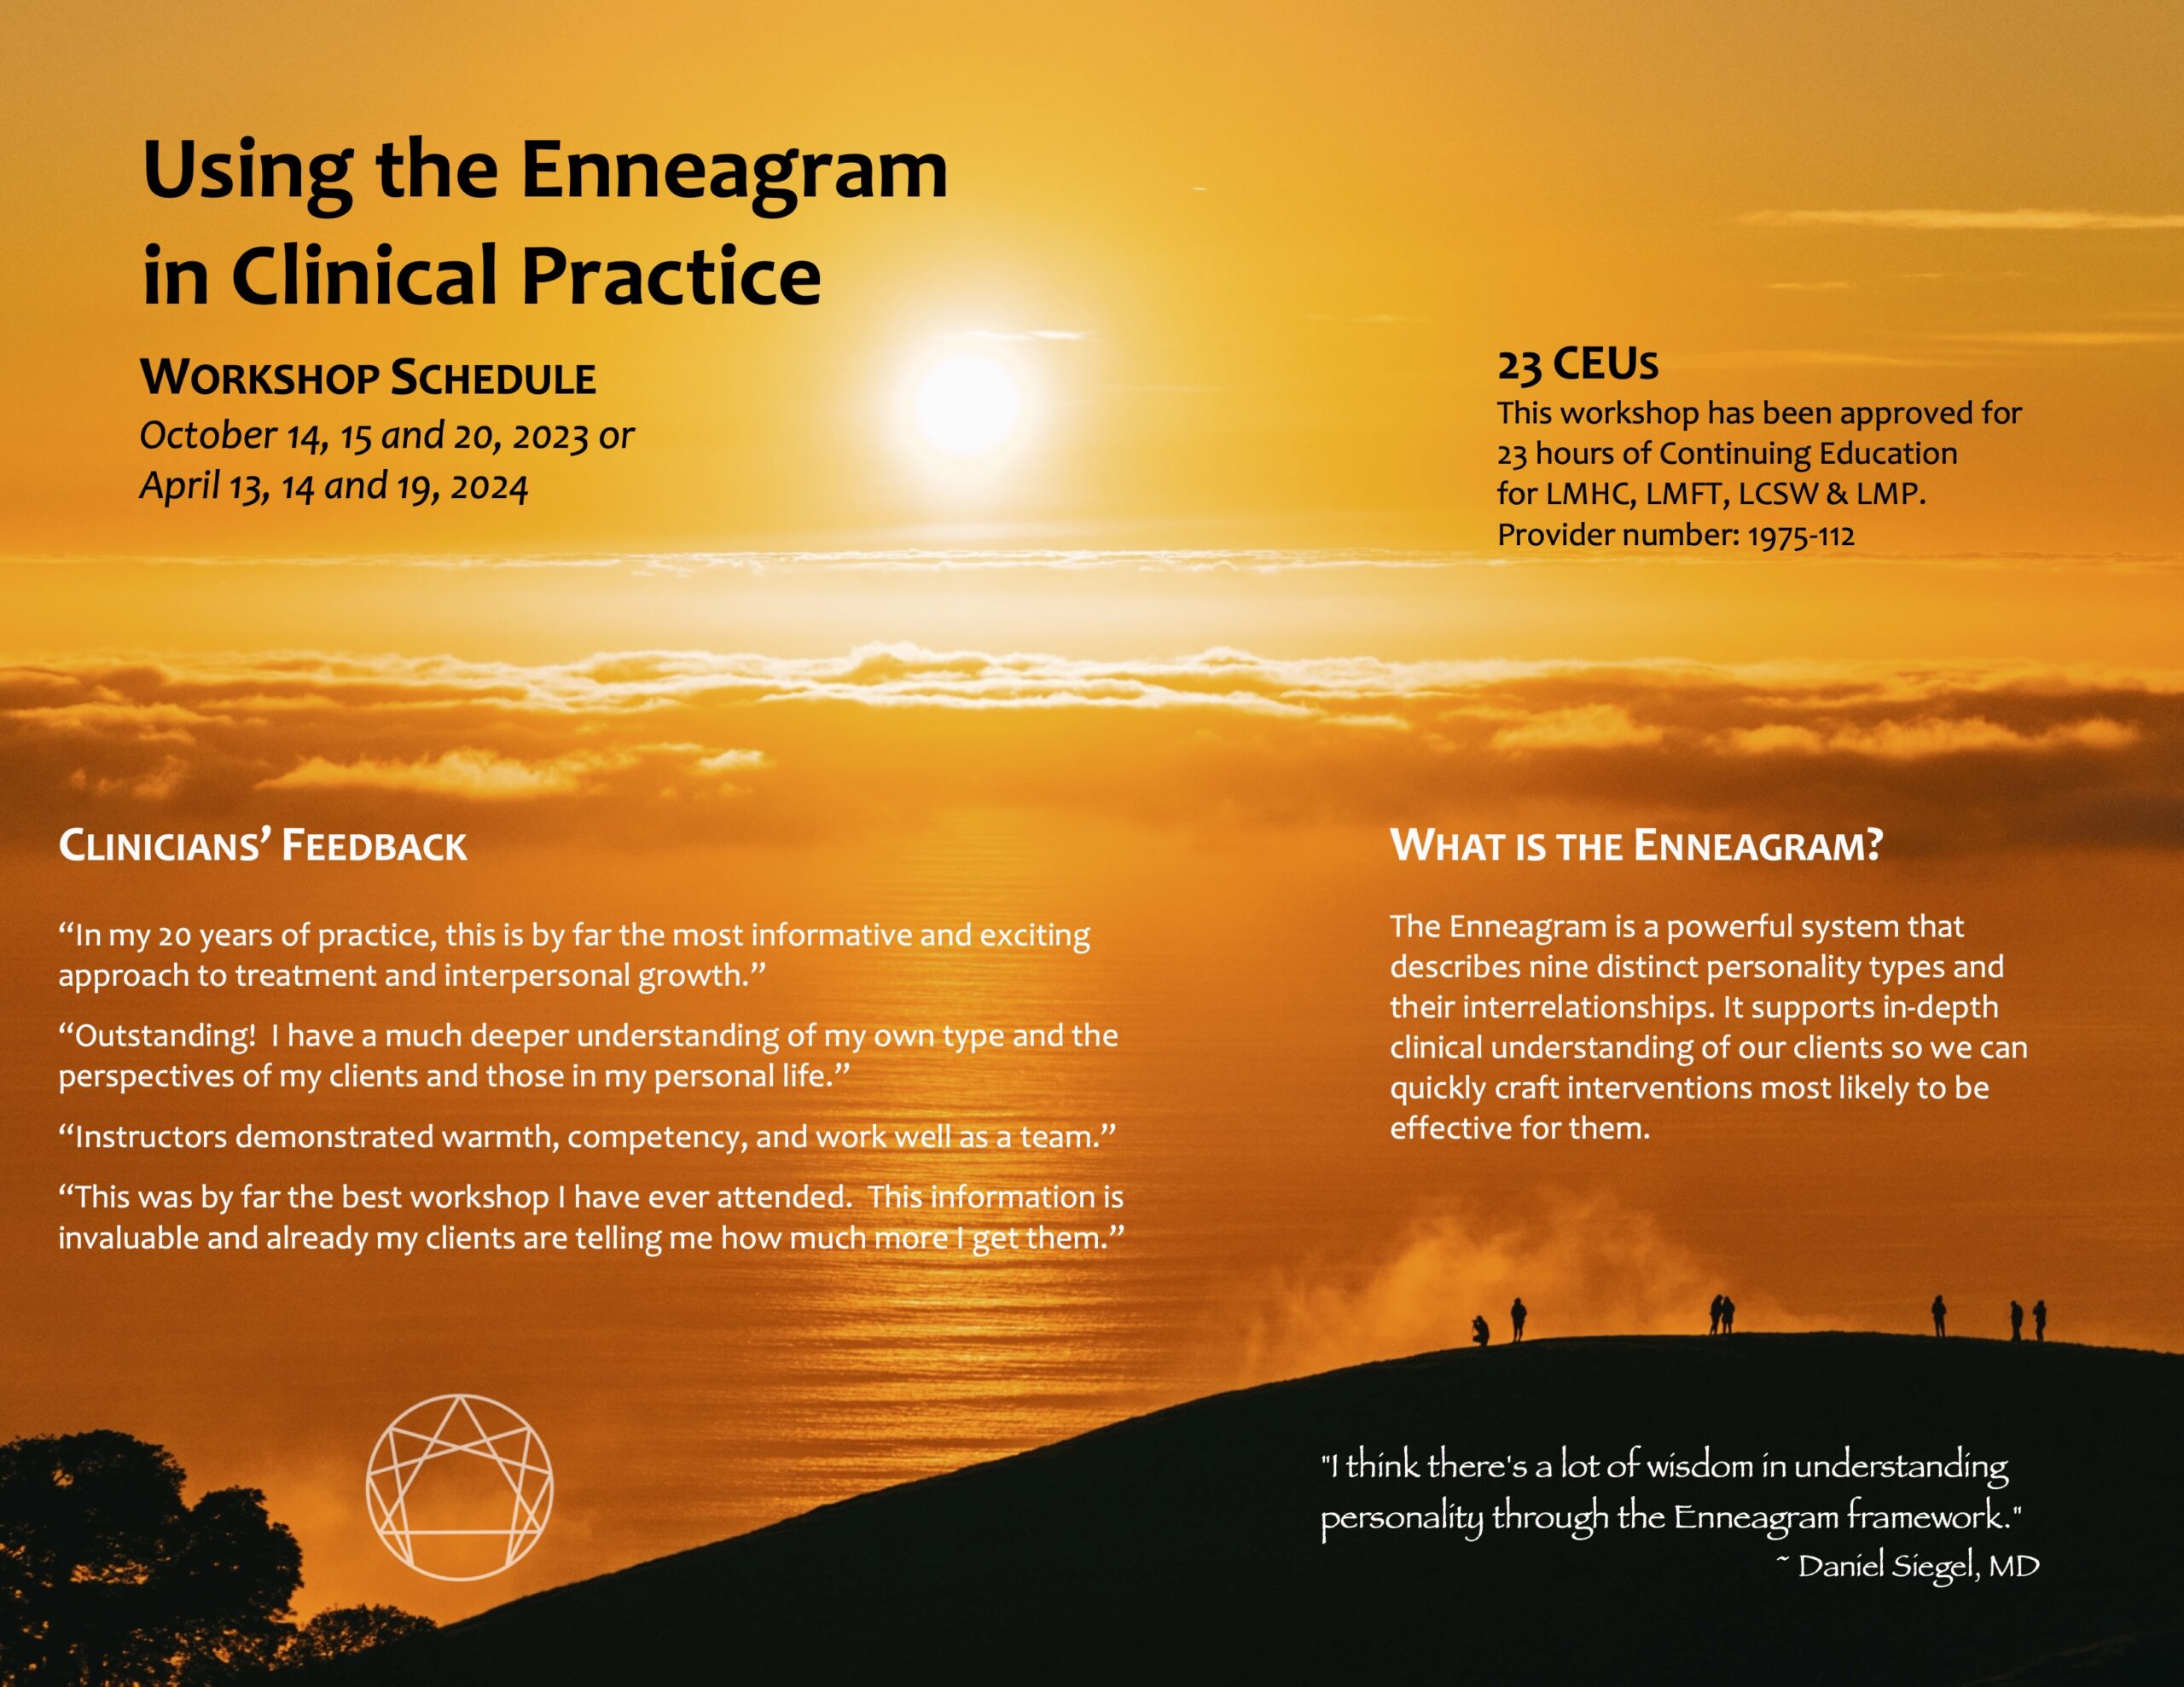 Using the Enneagram in Clinical Practice Workshops